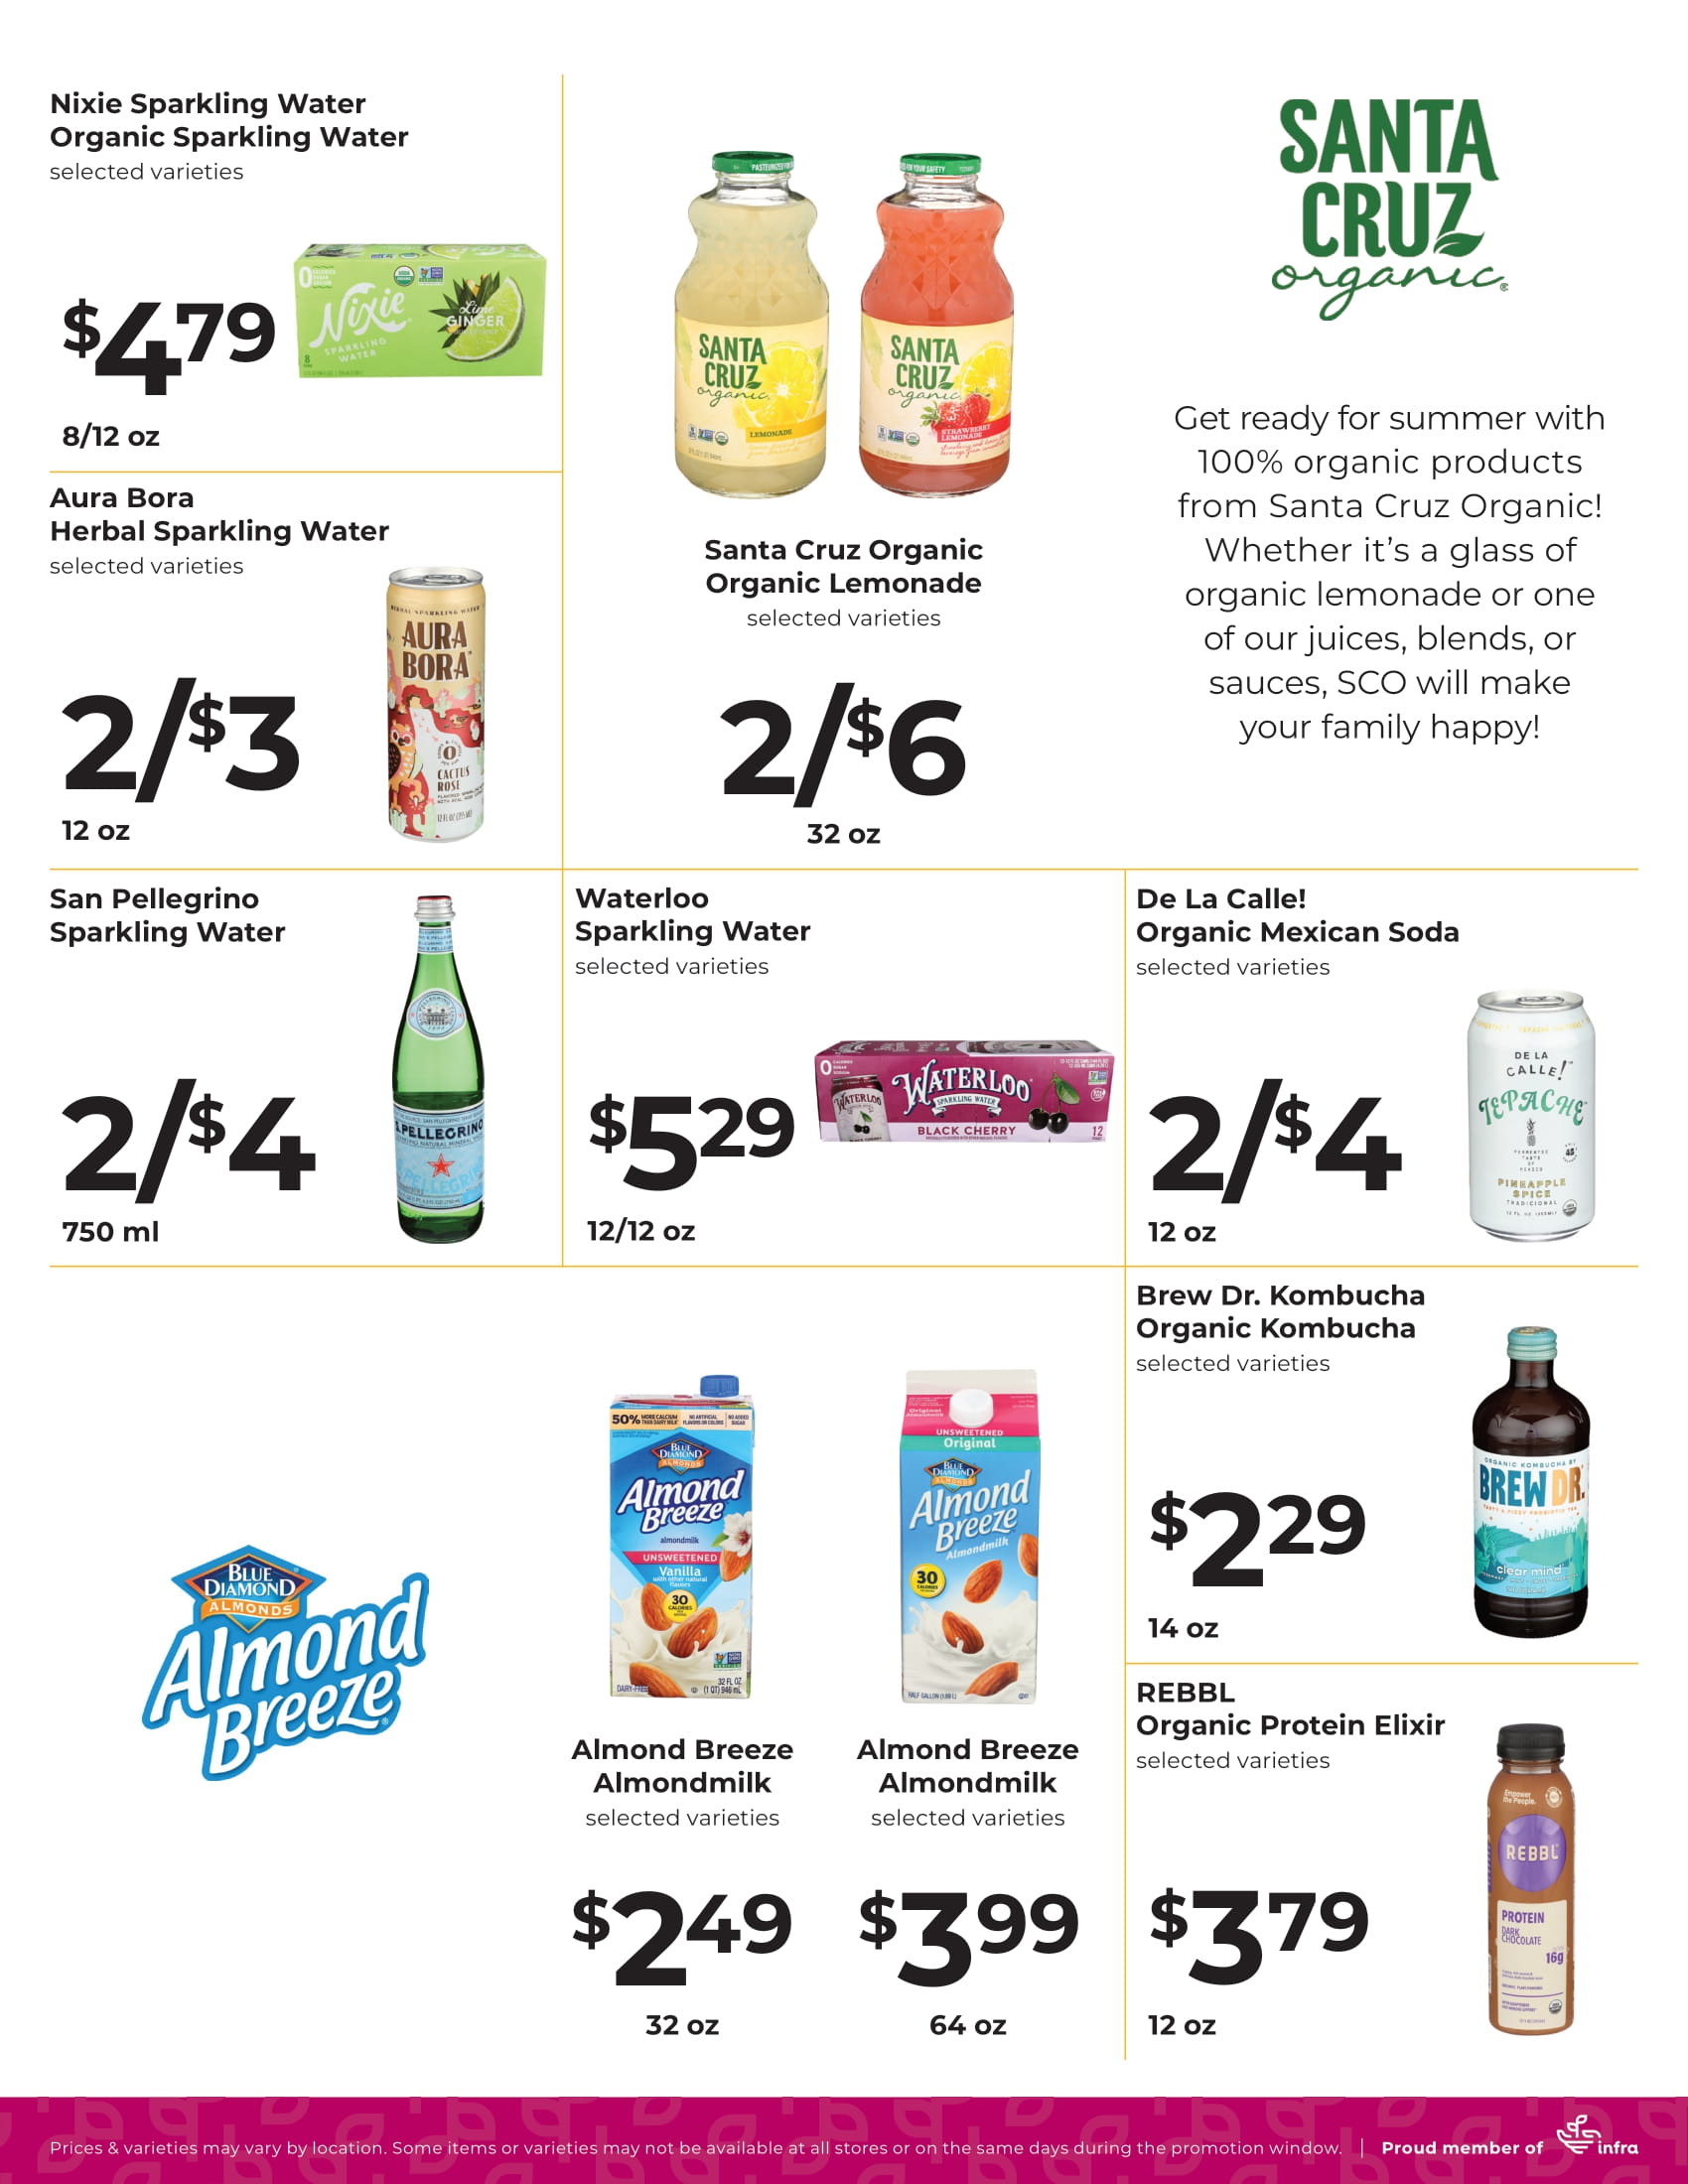 Ramona Family Naturals - monthly specials page 5